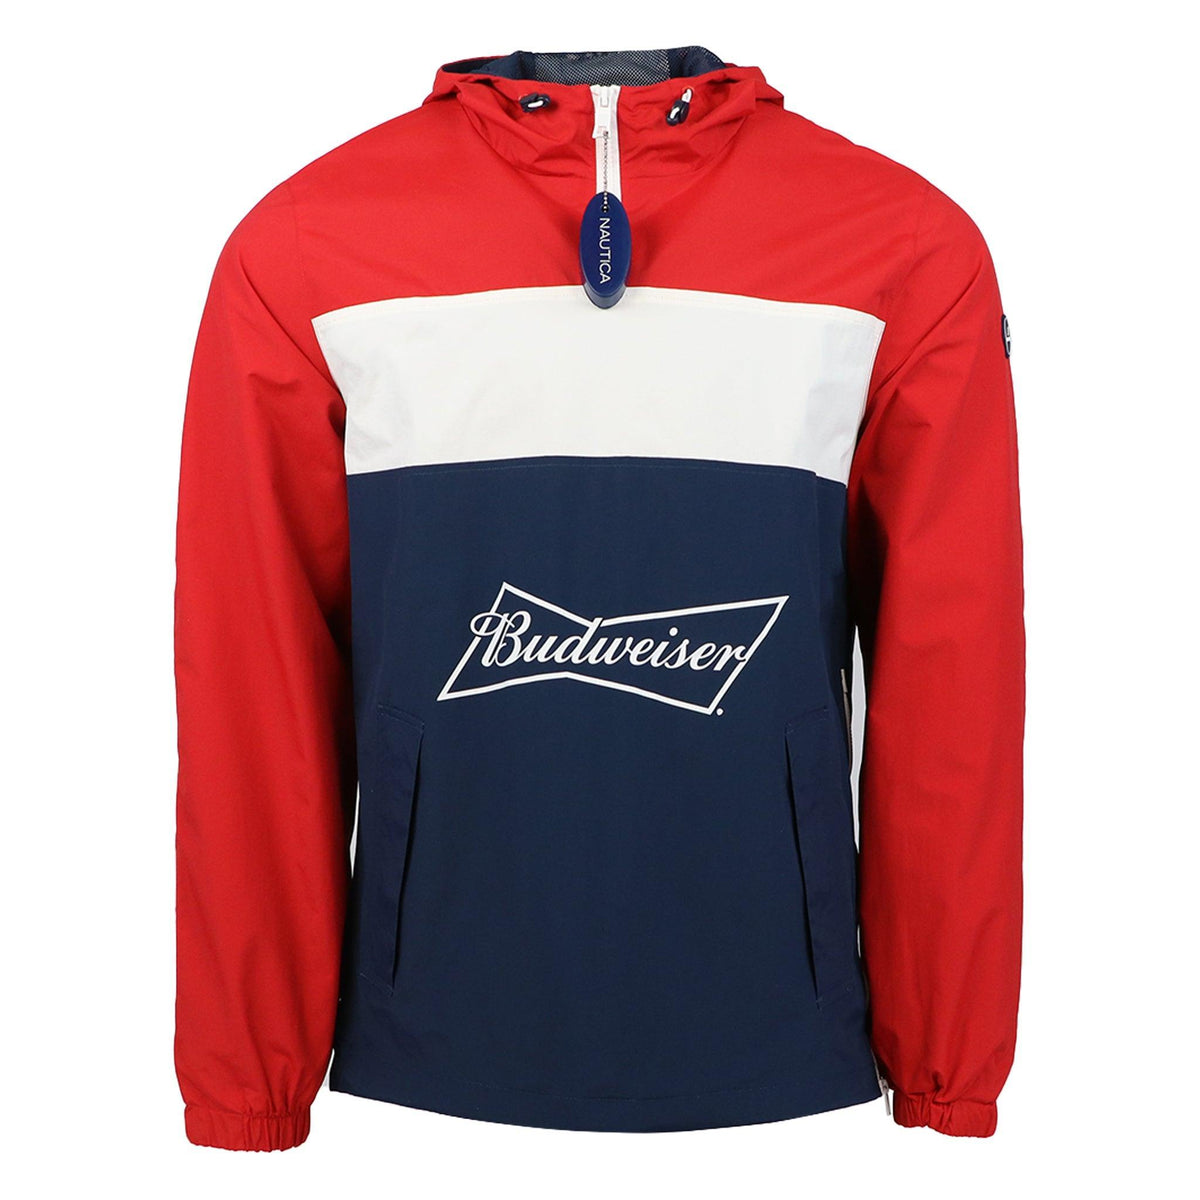 Budweiser Americana Windbreaker Budweiser Stay active and fit Get Active  and Fit